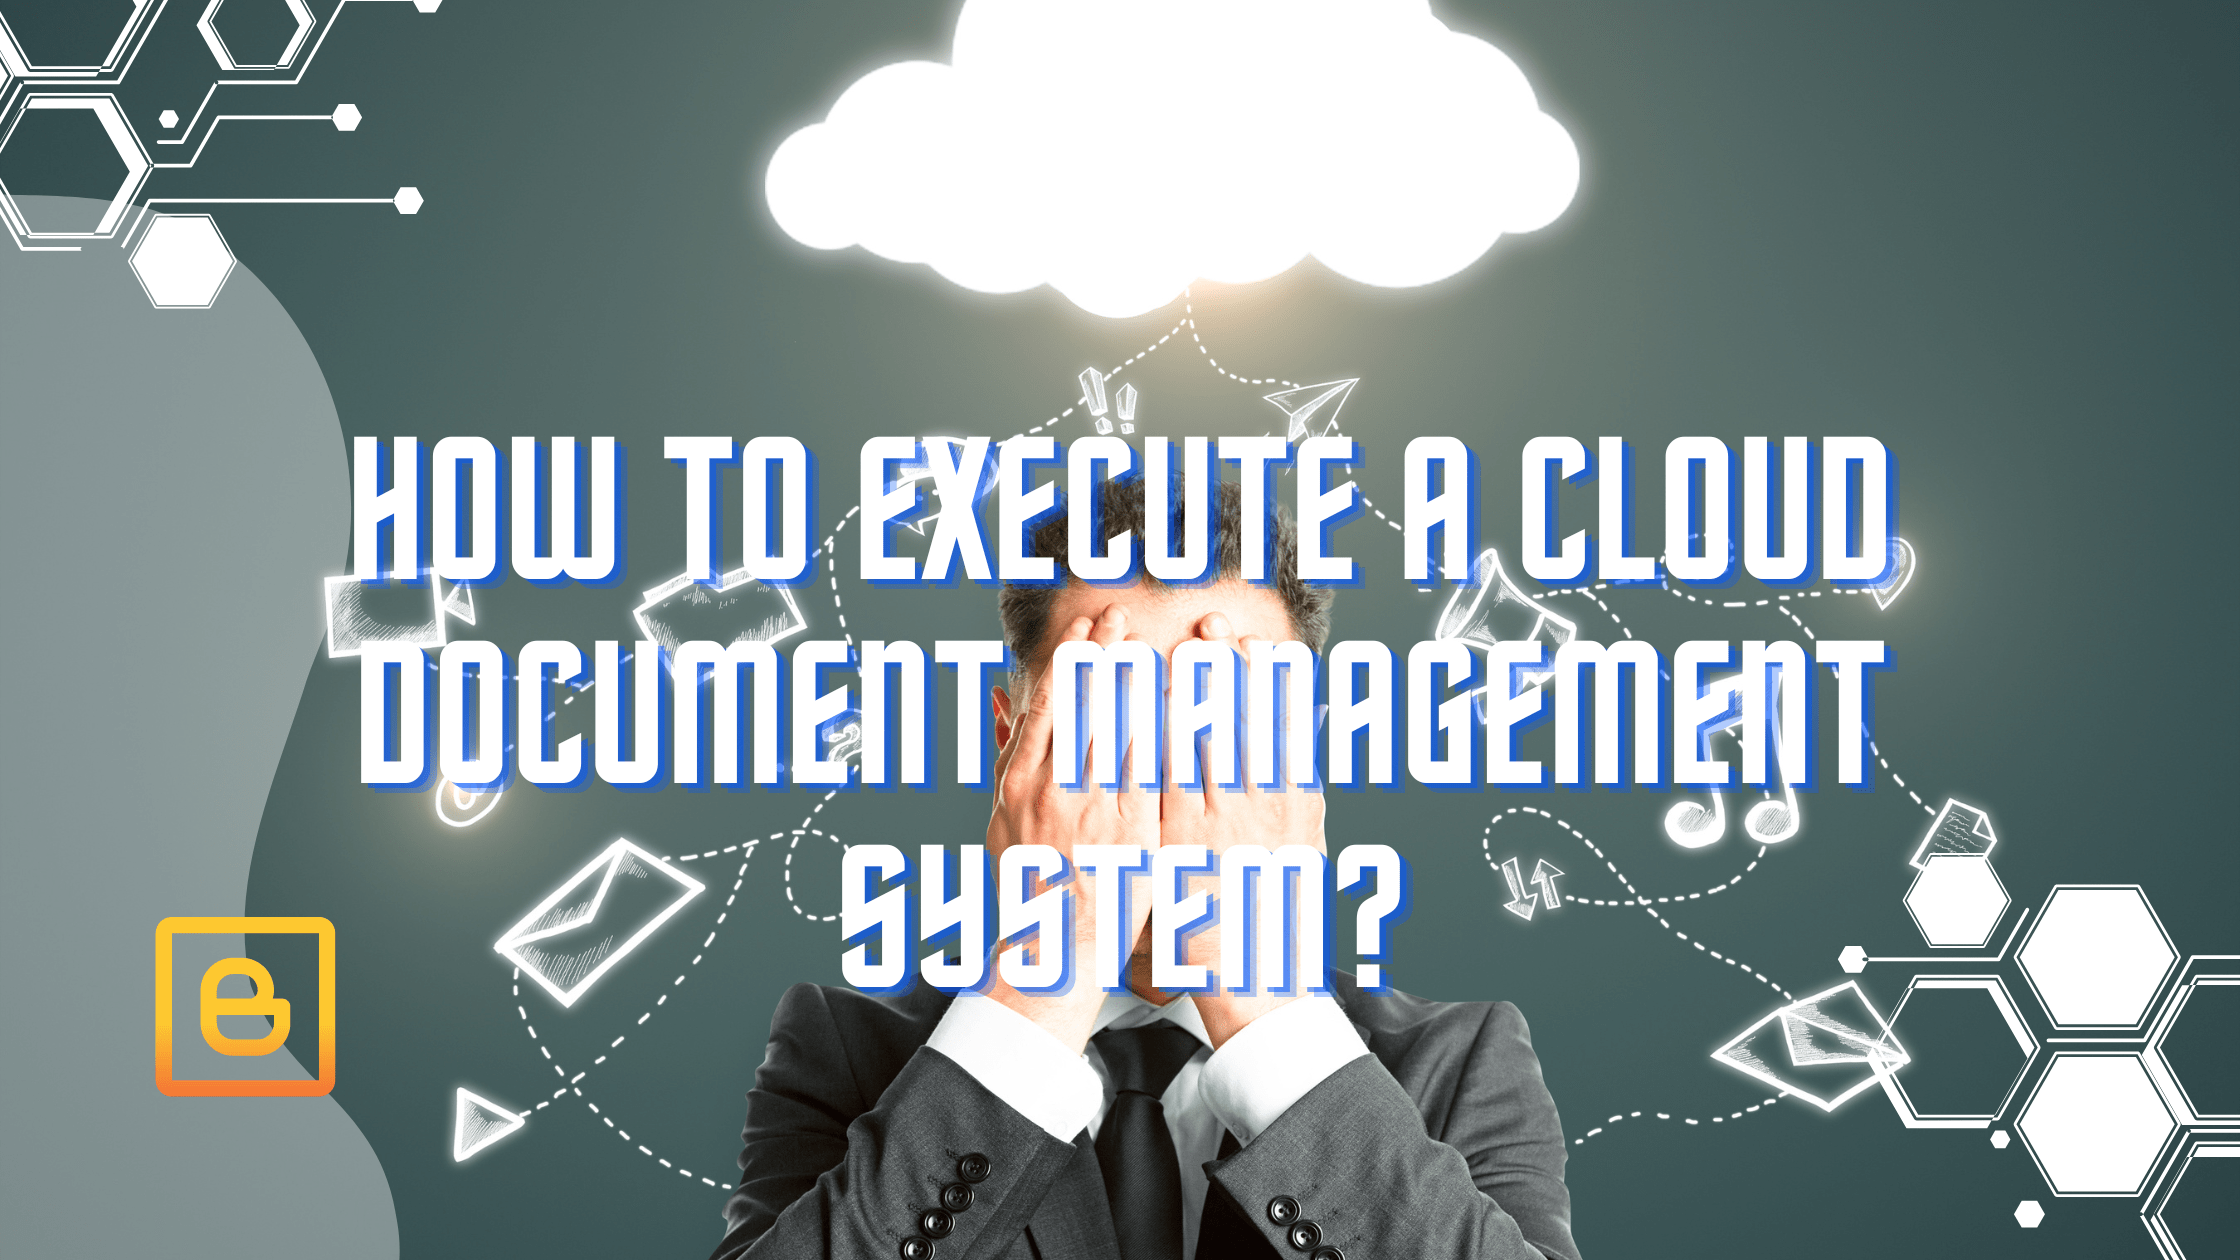 How to Execute a Cloud Document Management System?